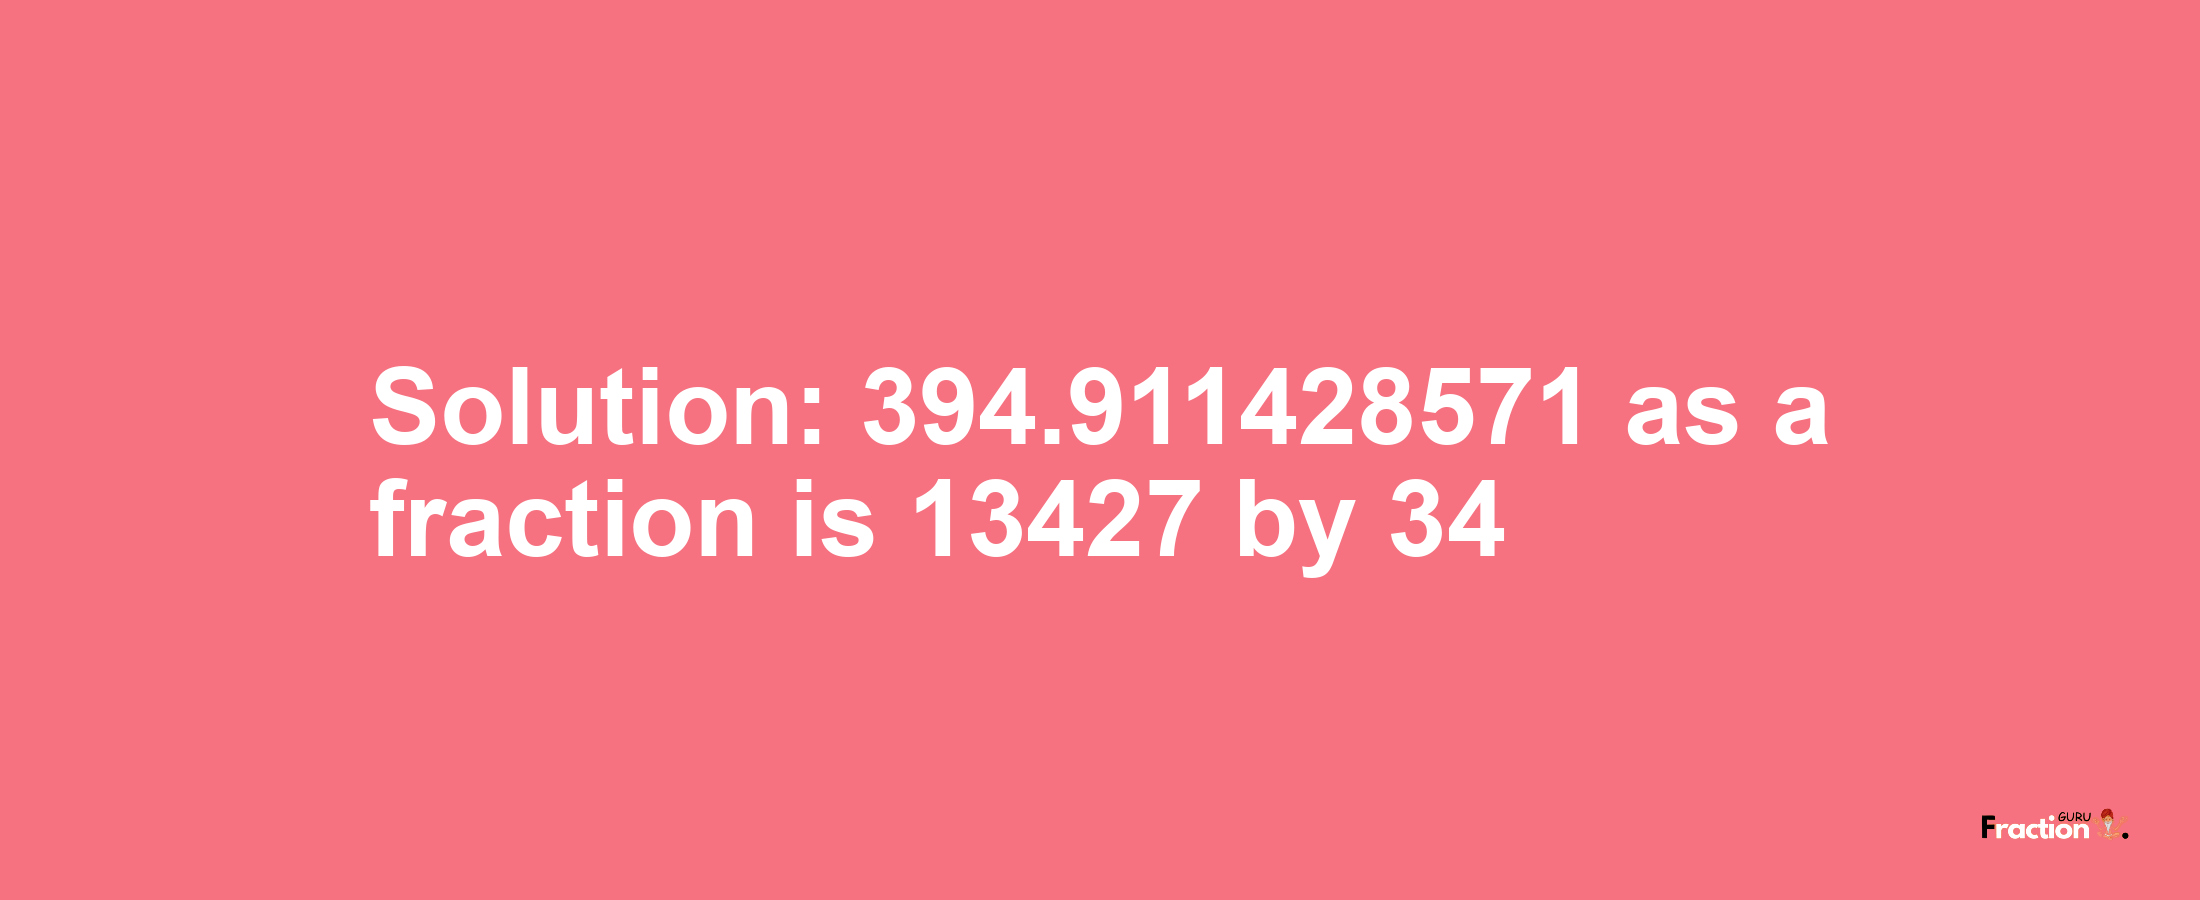 Solution:394.911428571 as a fraction is 13427/34